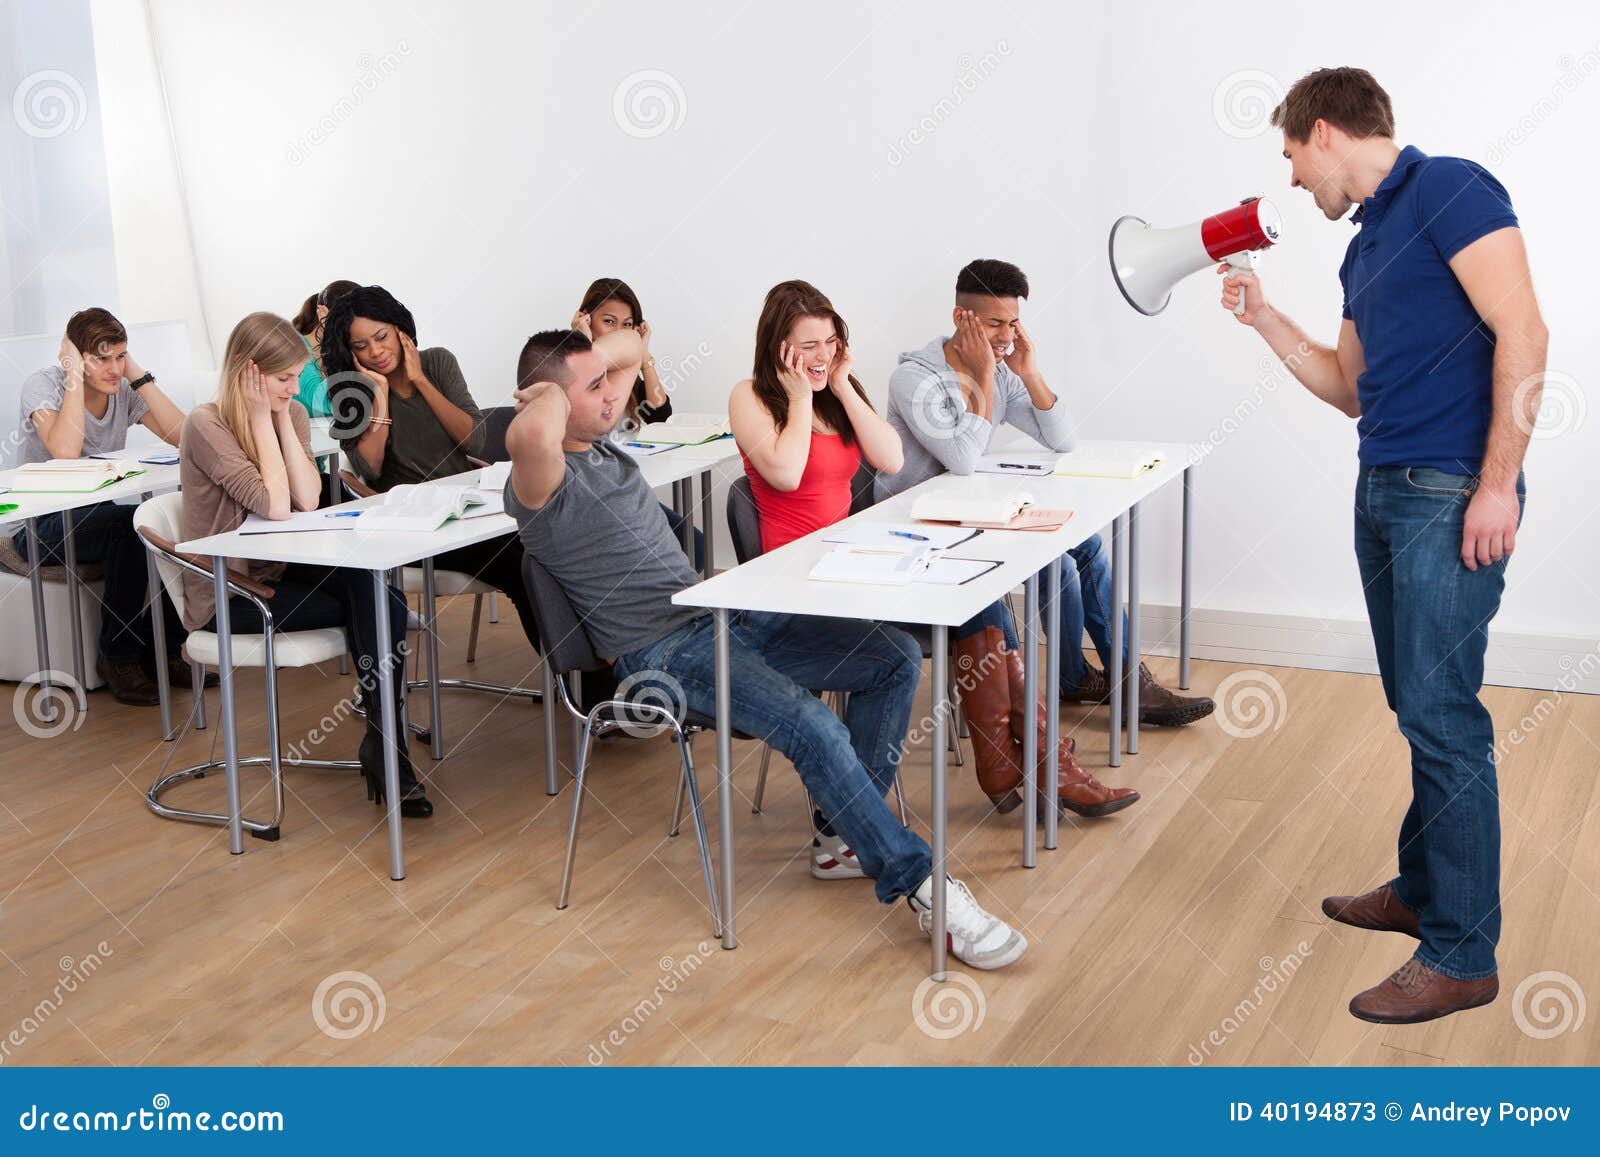 638 Teacher Yelling Photos - Free & Royalty-Free Stock Photos from  Dreamstime